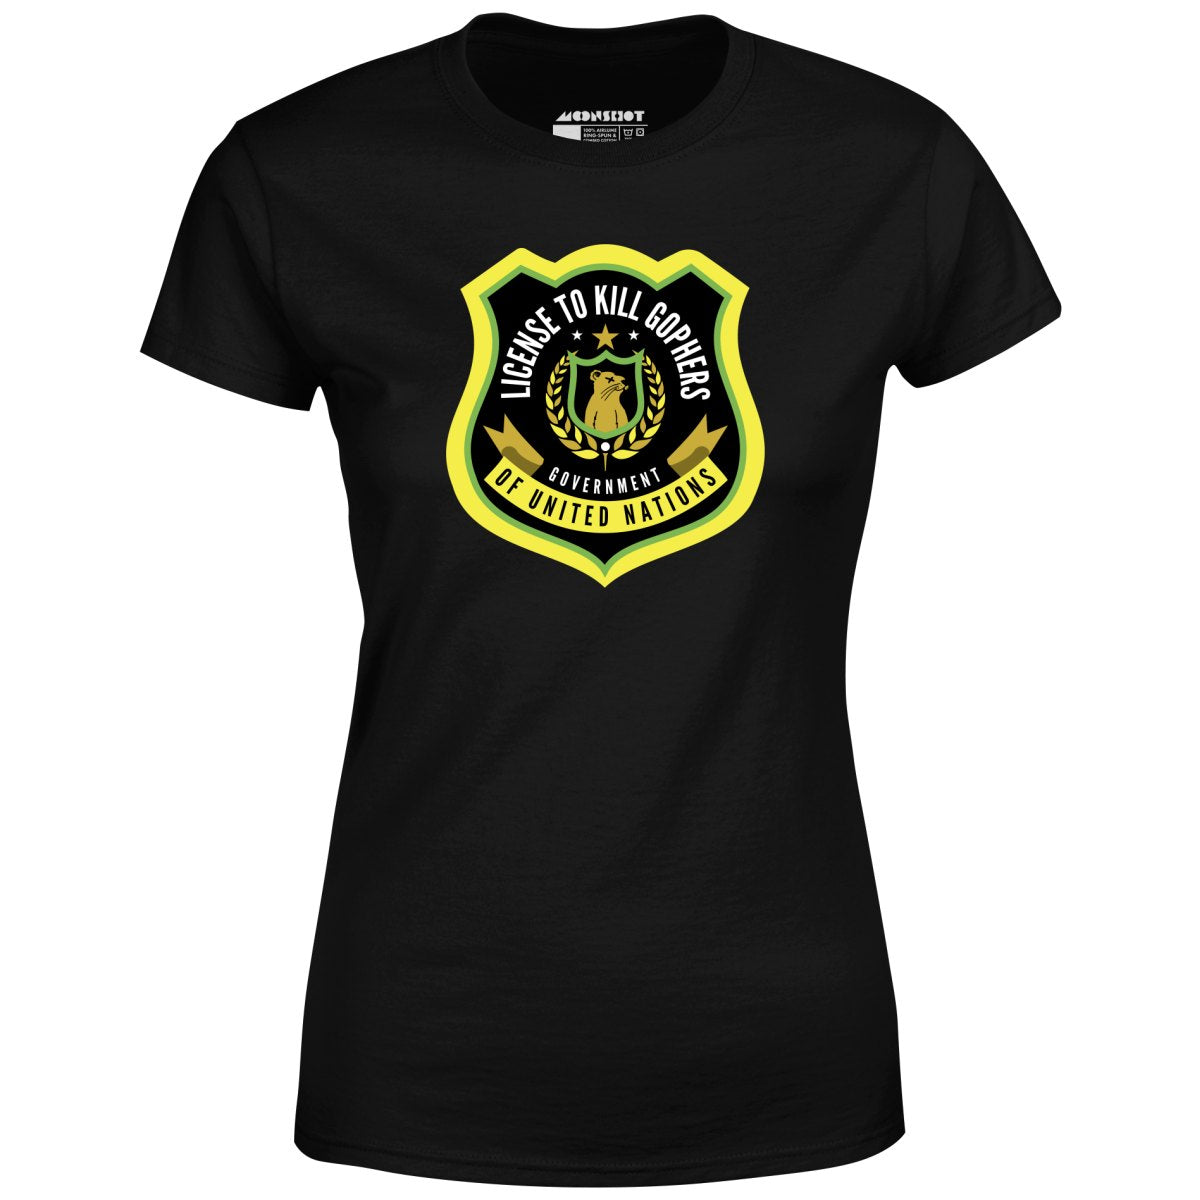 License to Kill Gophers - Women's T-Shirt